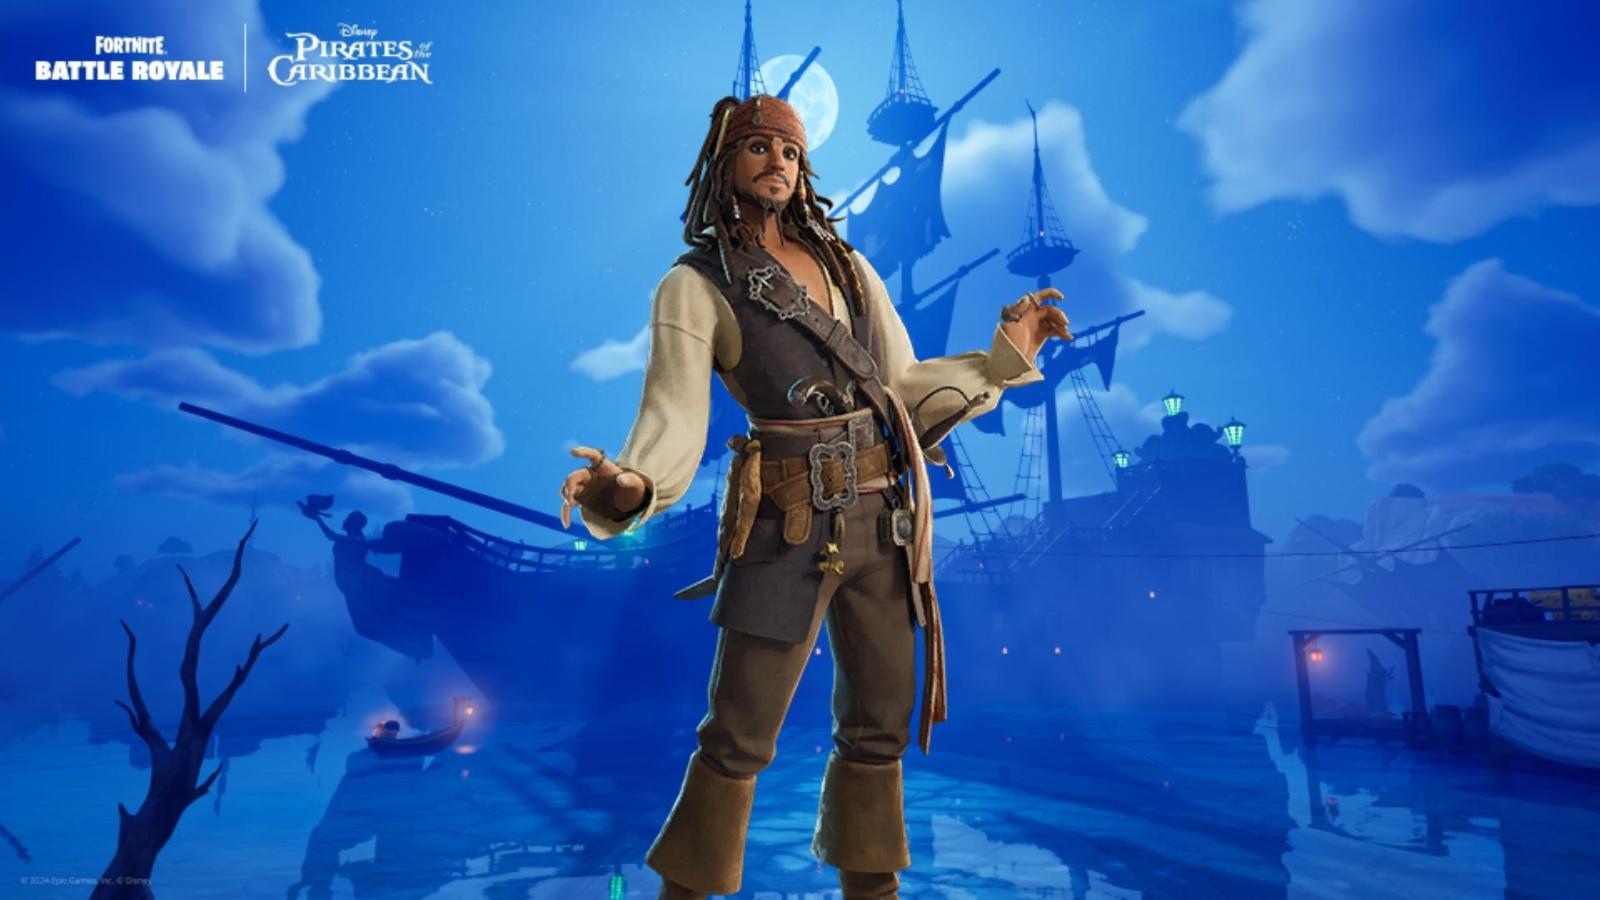 A screenshot featuring Jack Sparrow in Fortnite.